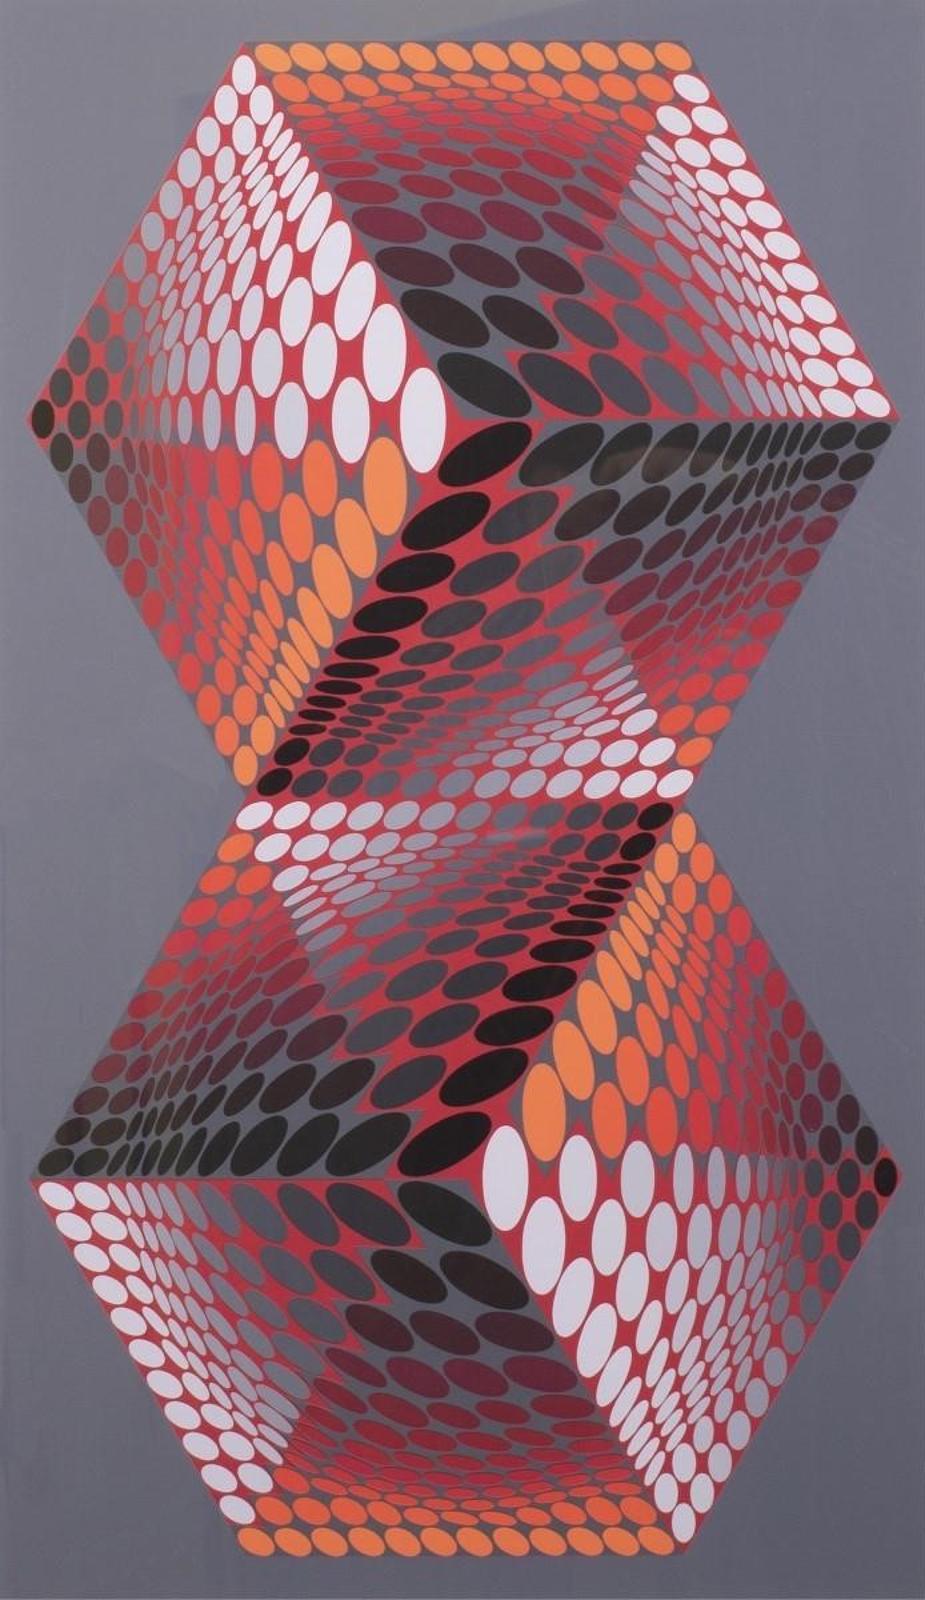 Victor Vasarely (1906-1997) - Untitled Composition (Red And Grey Cubes)